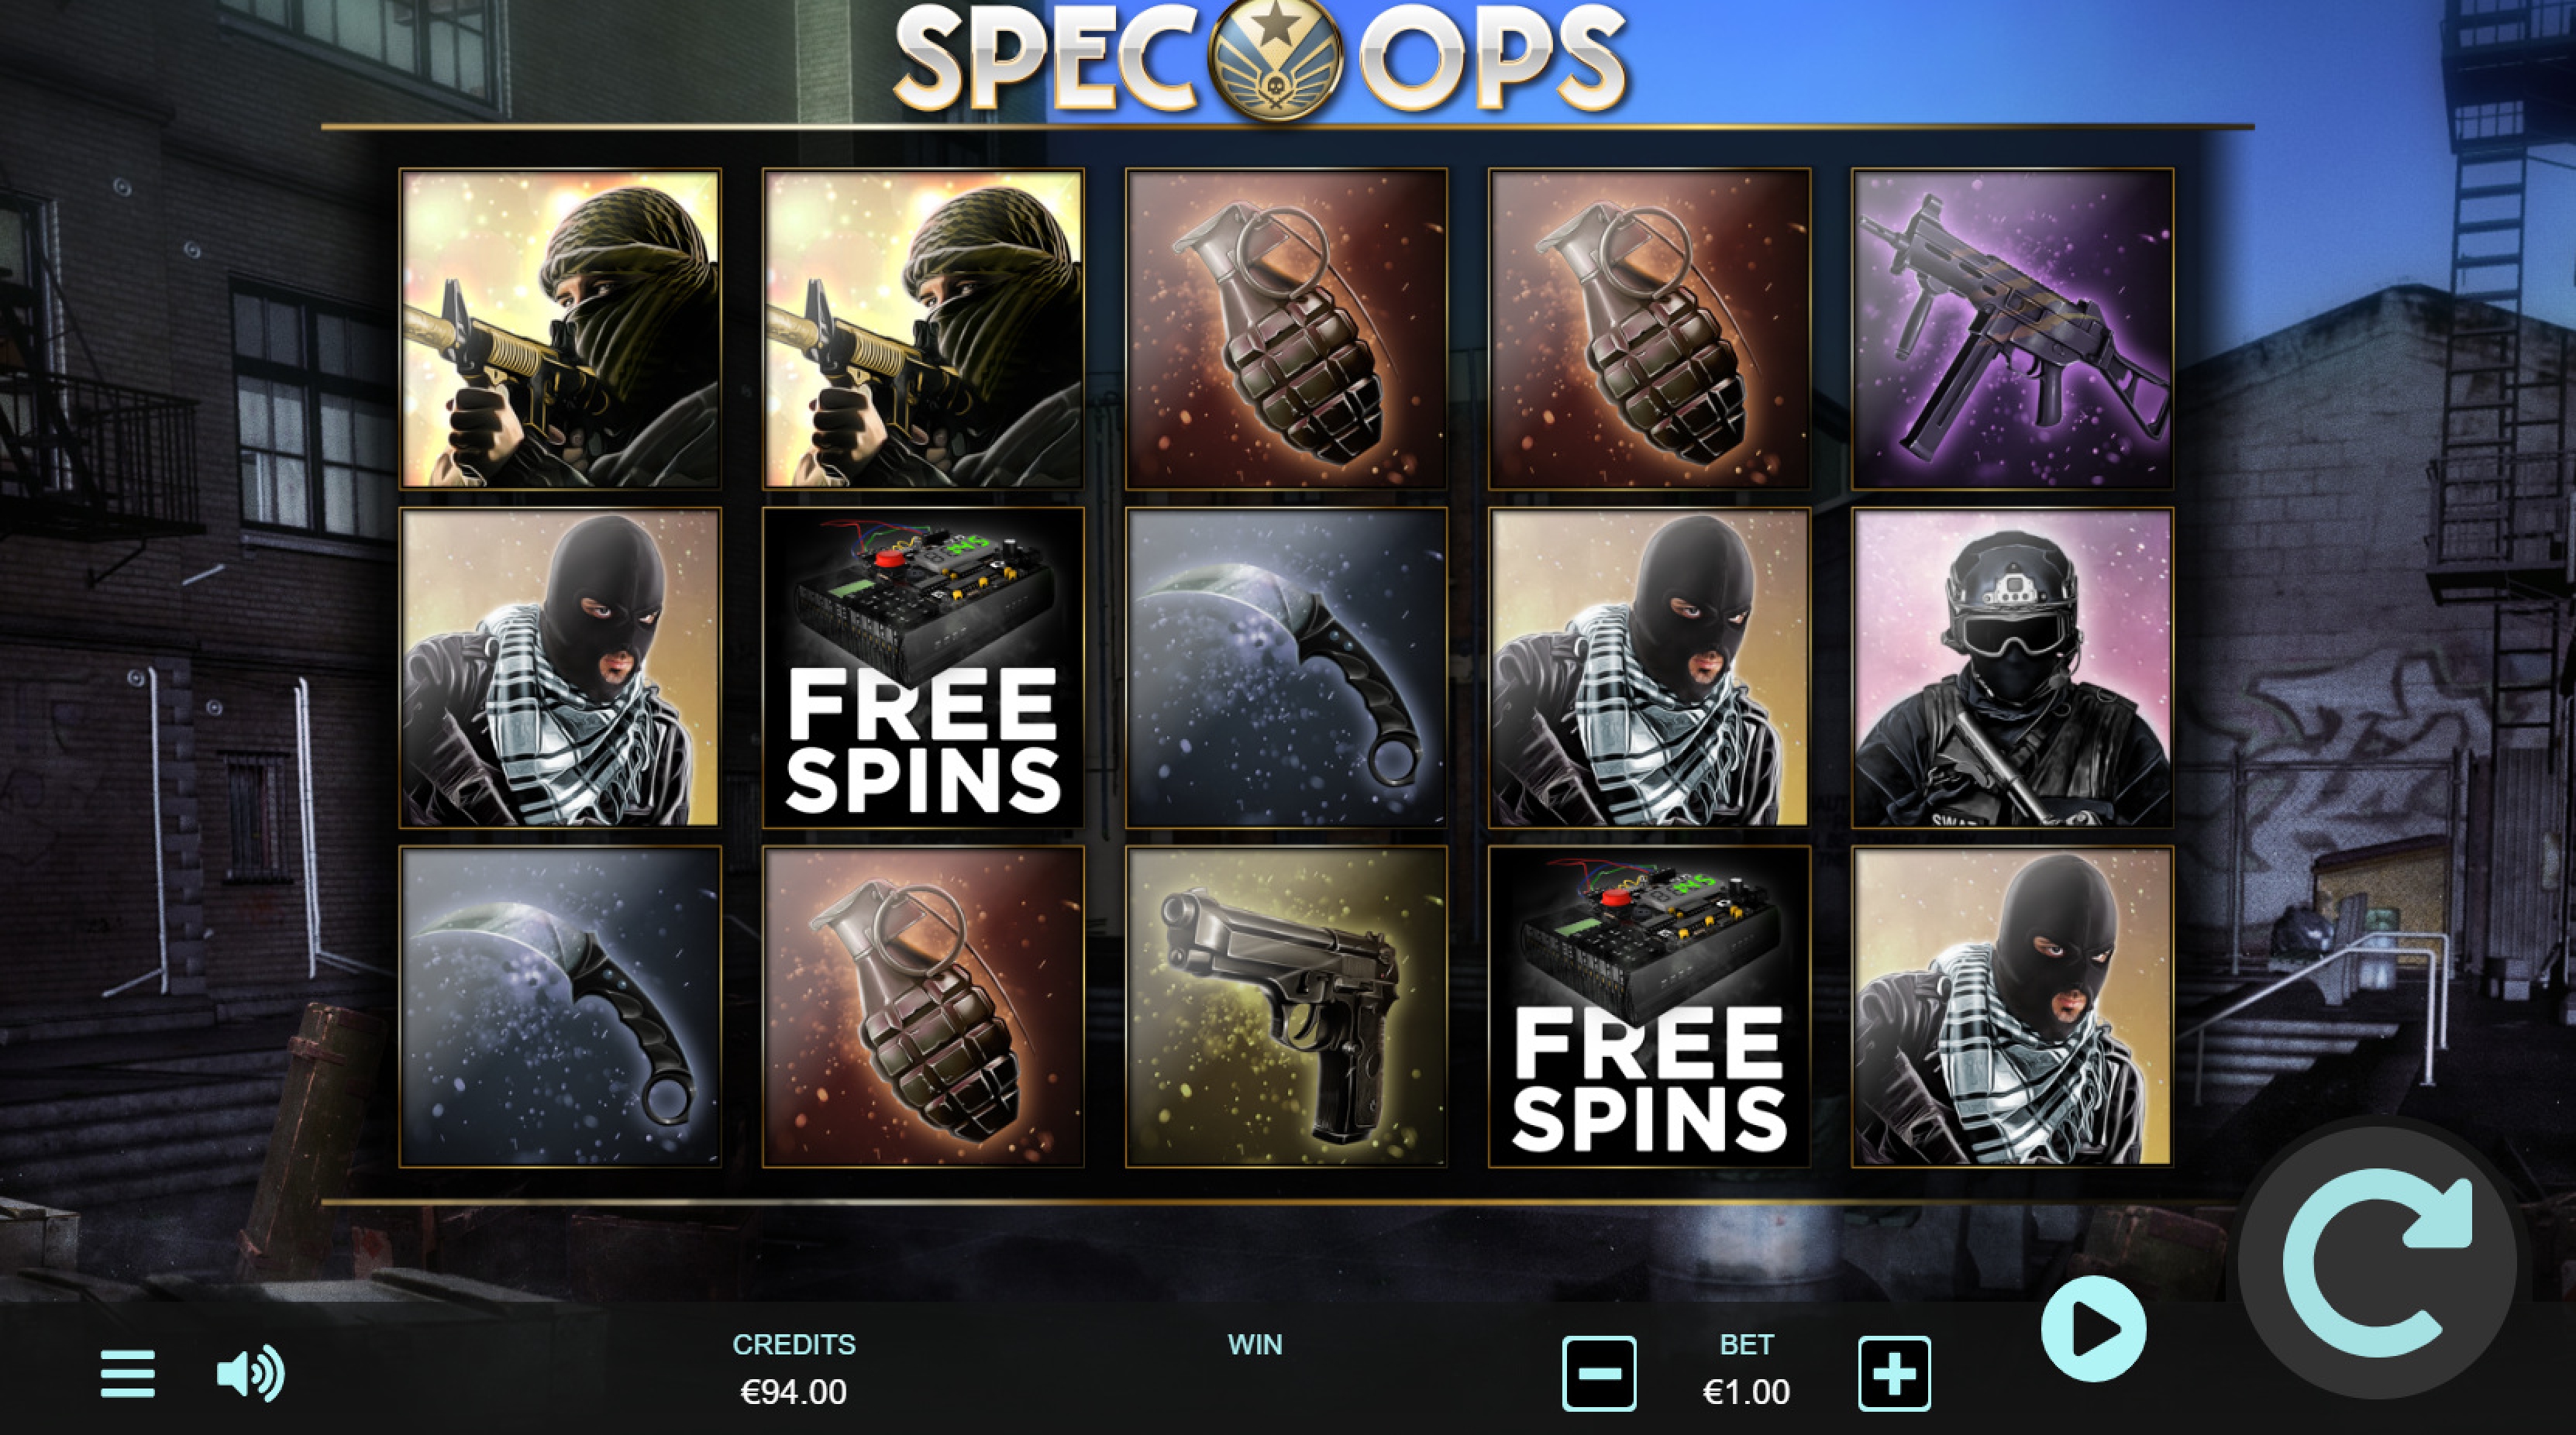 The Spec-Ops Online Slot Demo Game by Cubeia